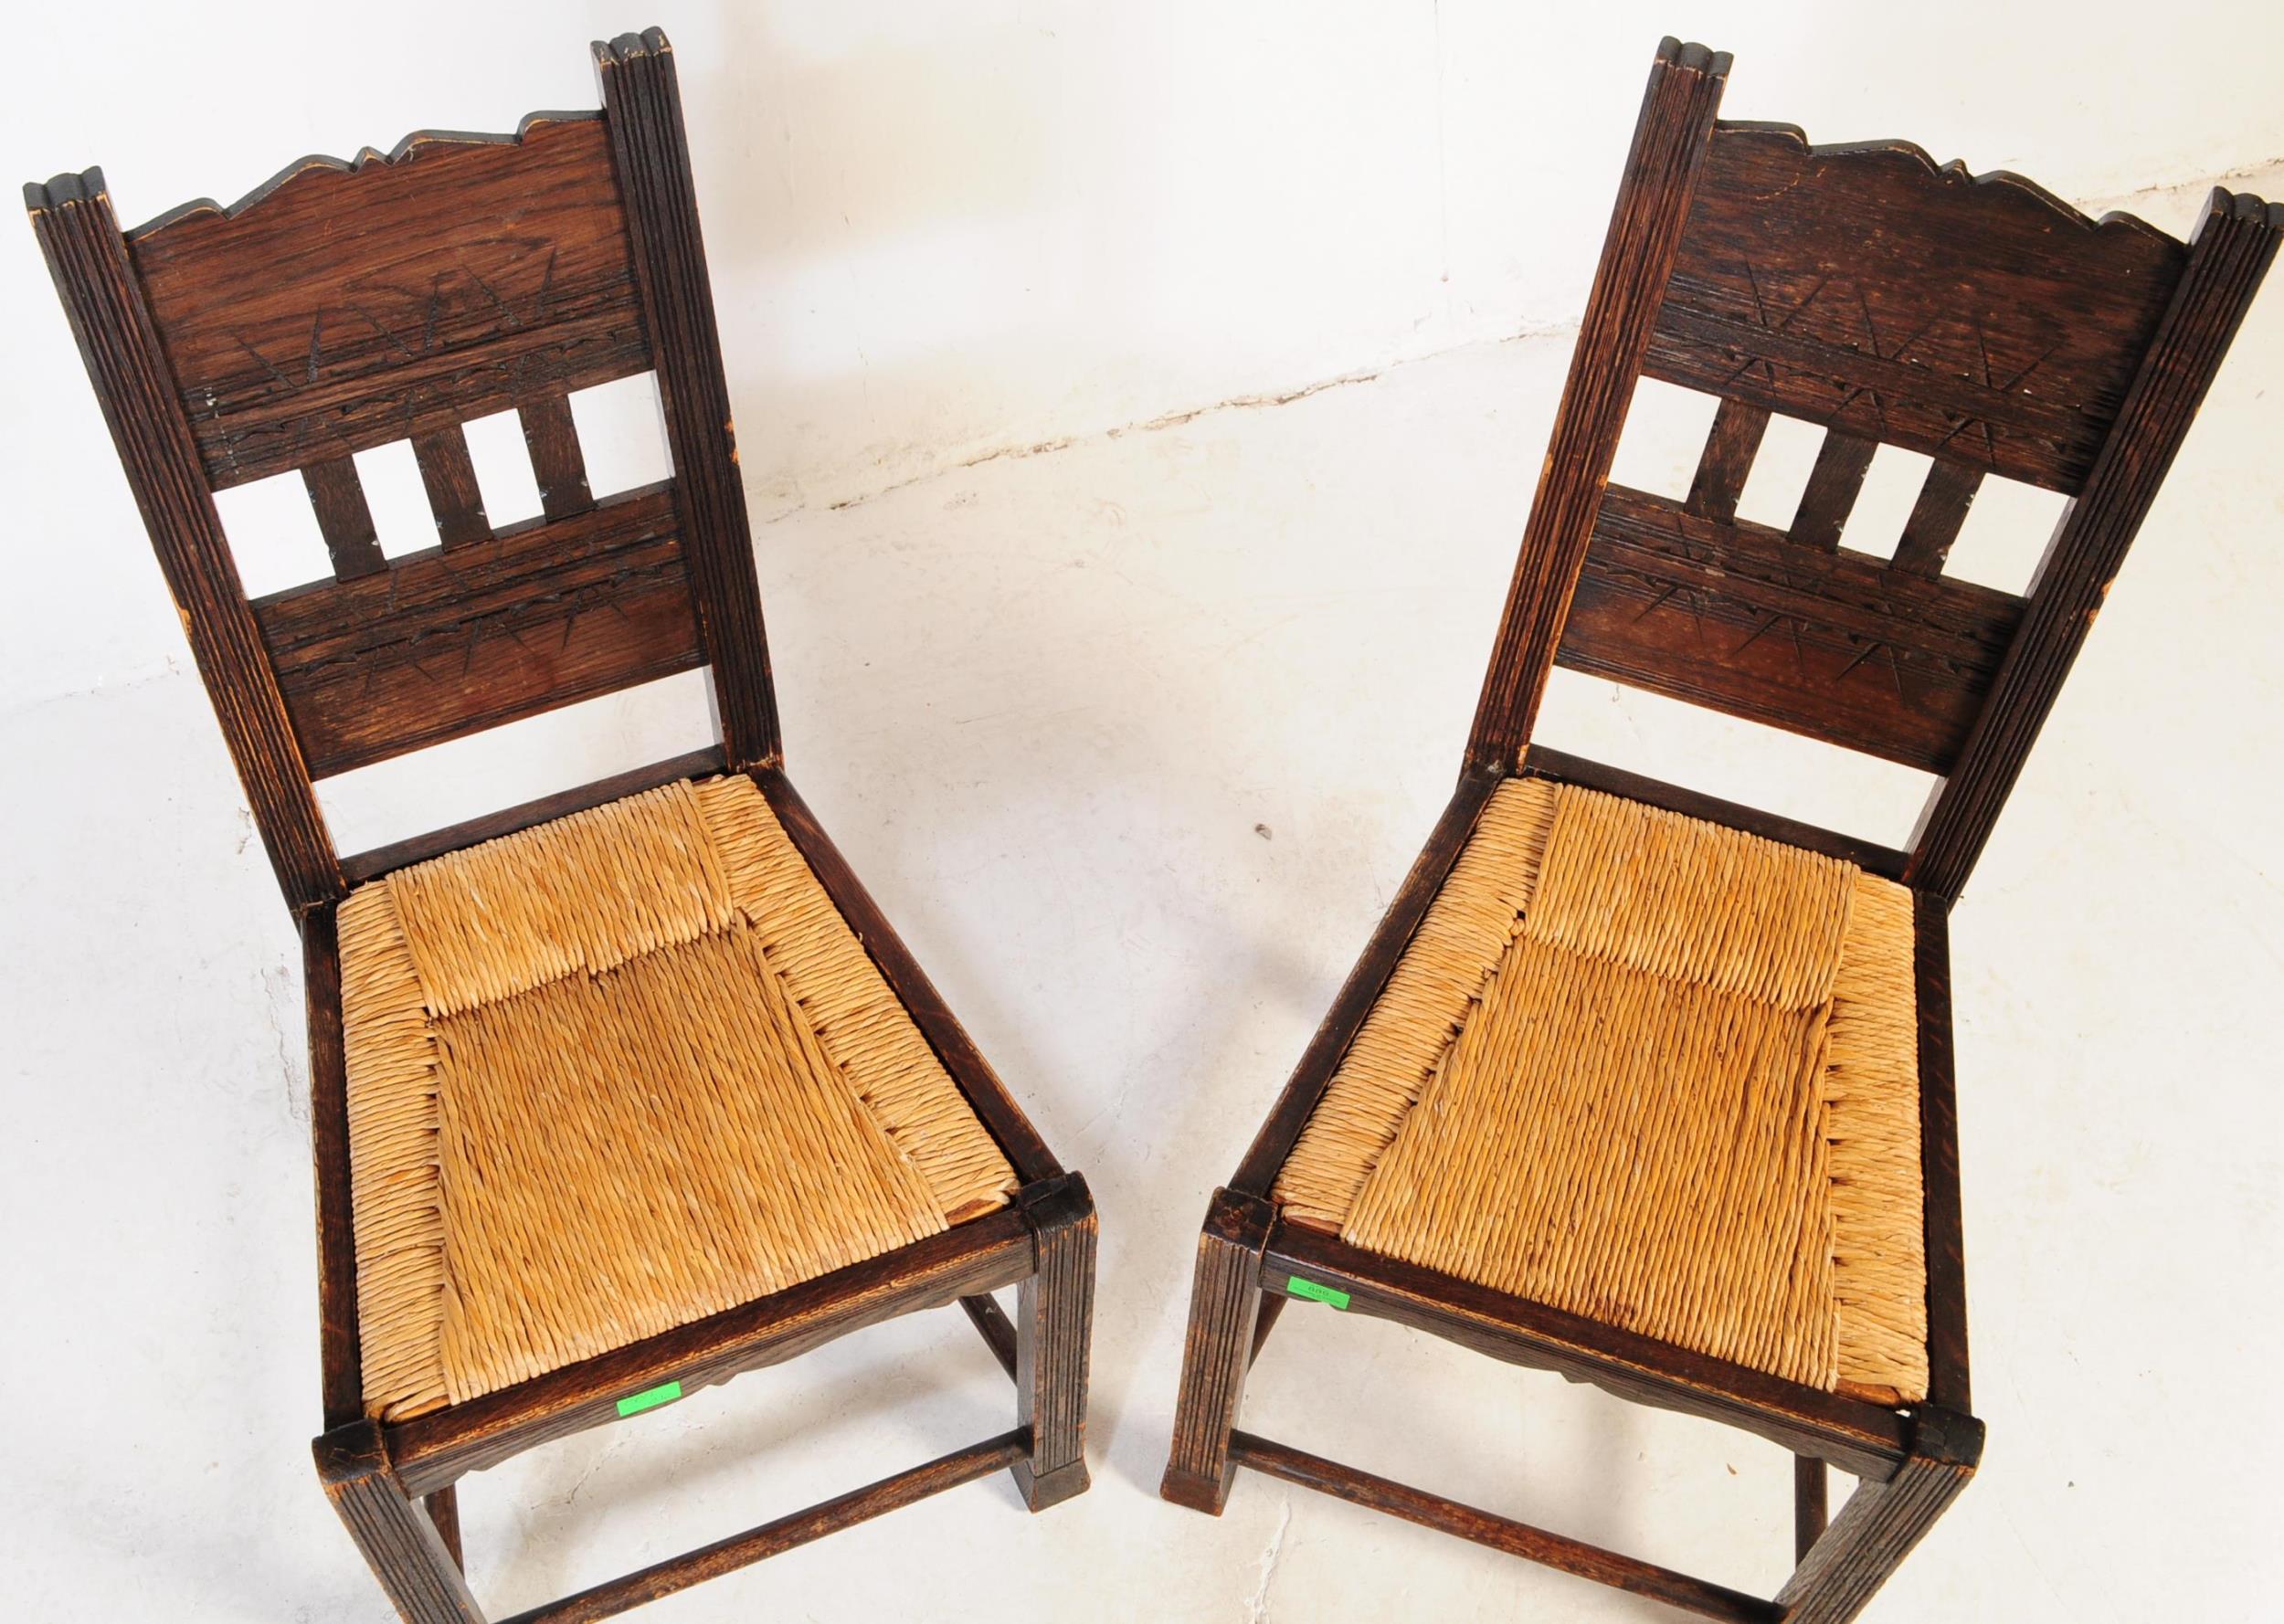 TWO MATCHING EARLY 20TH CENTURY INLAID RATTAN WICKER CHAIRS - Image 3 of 3